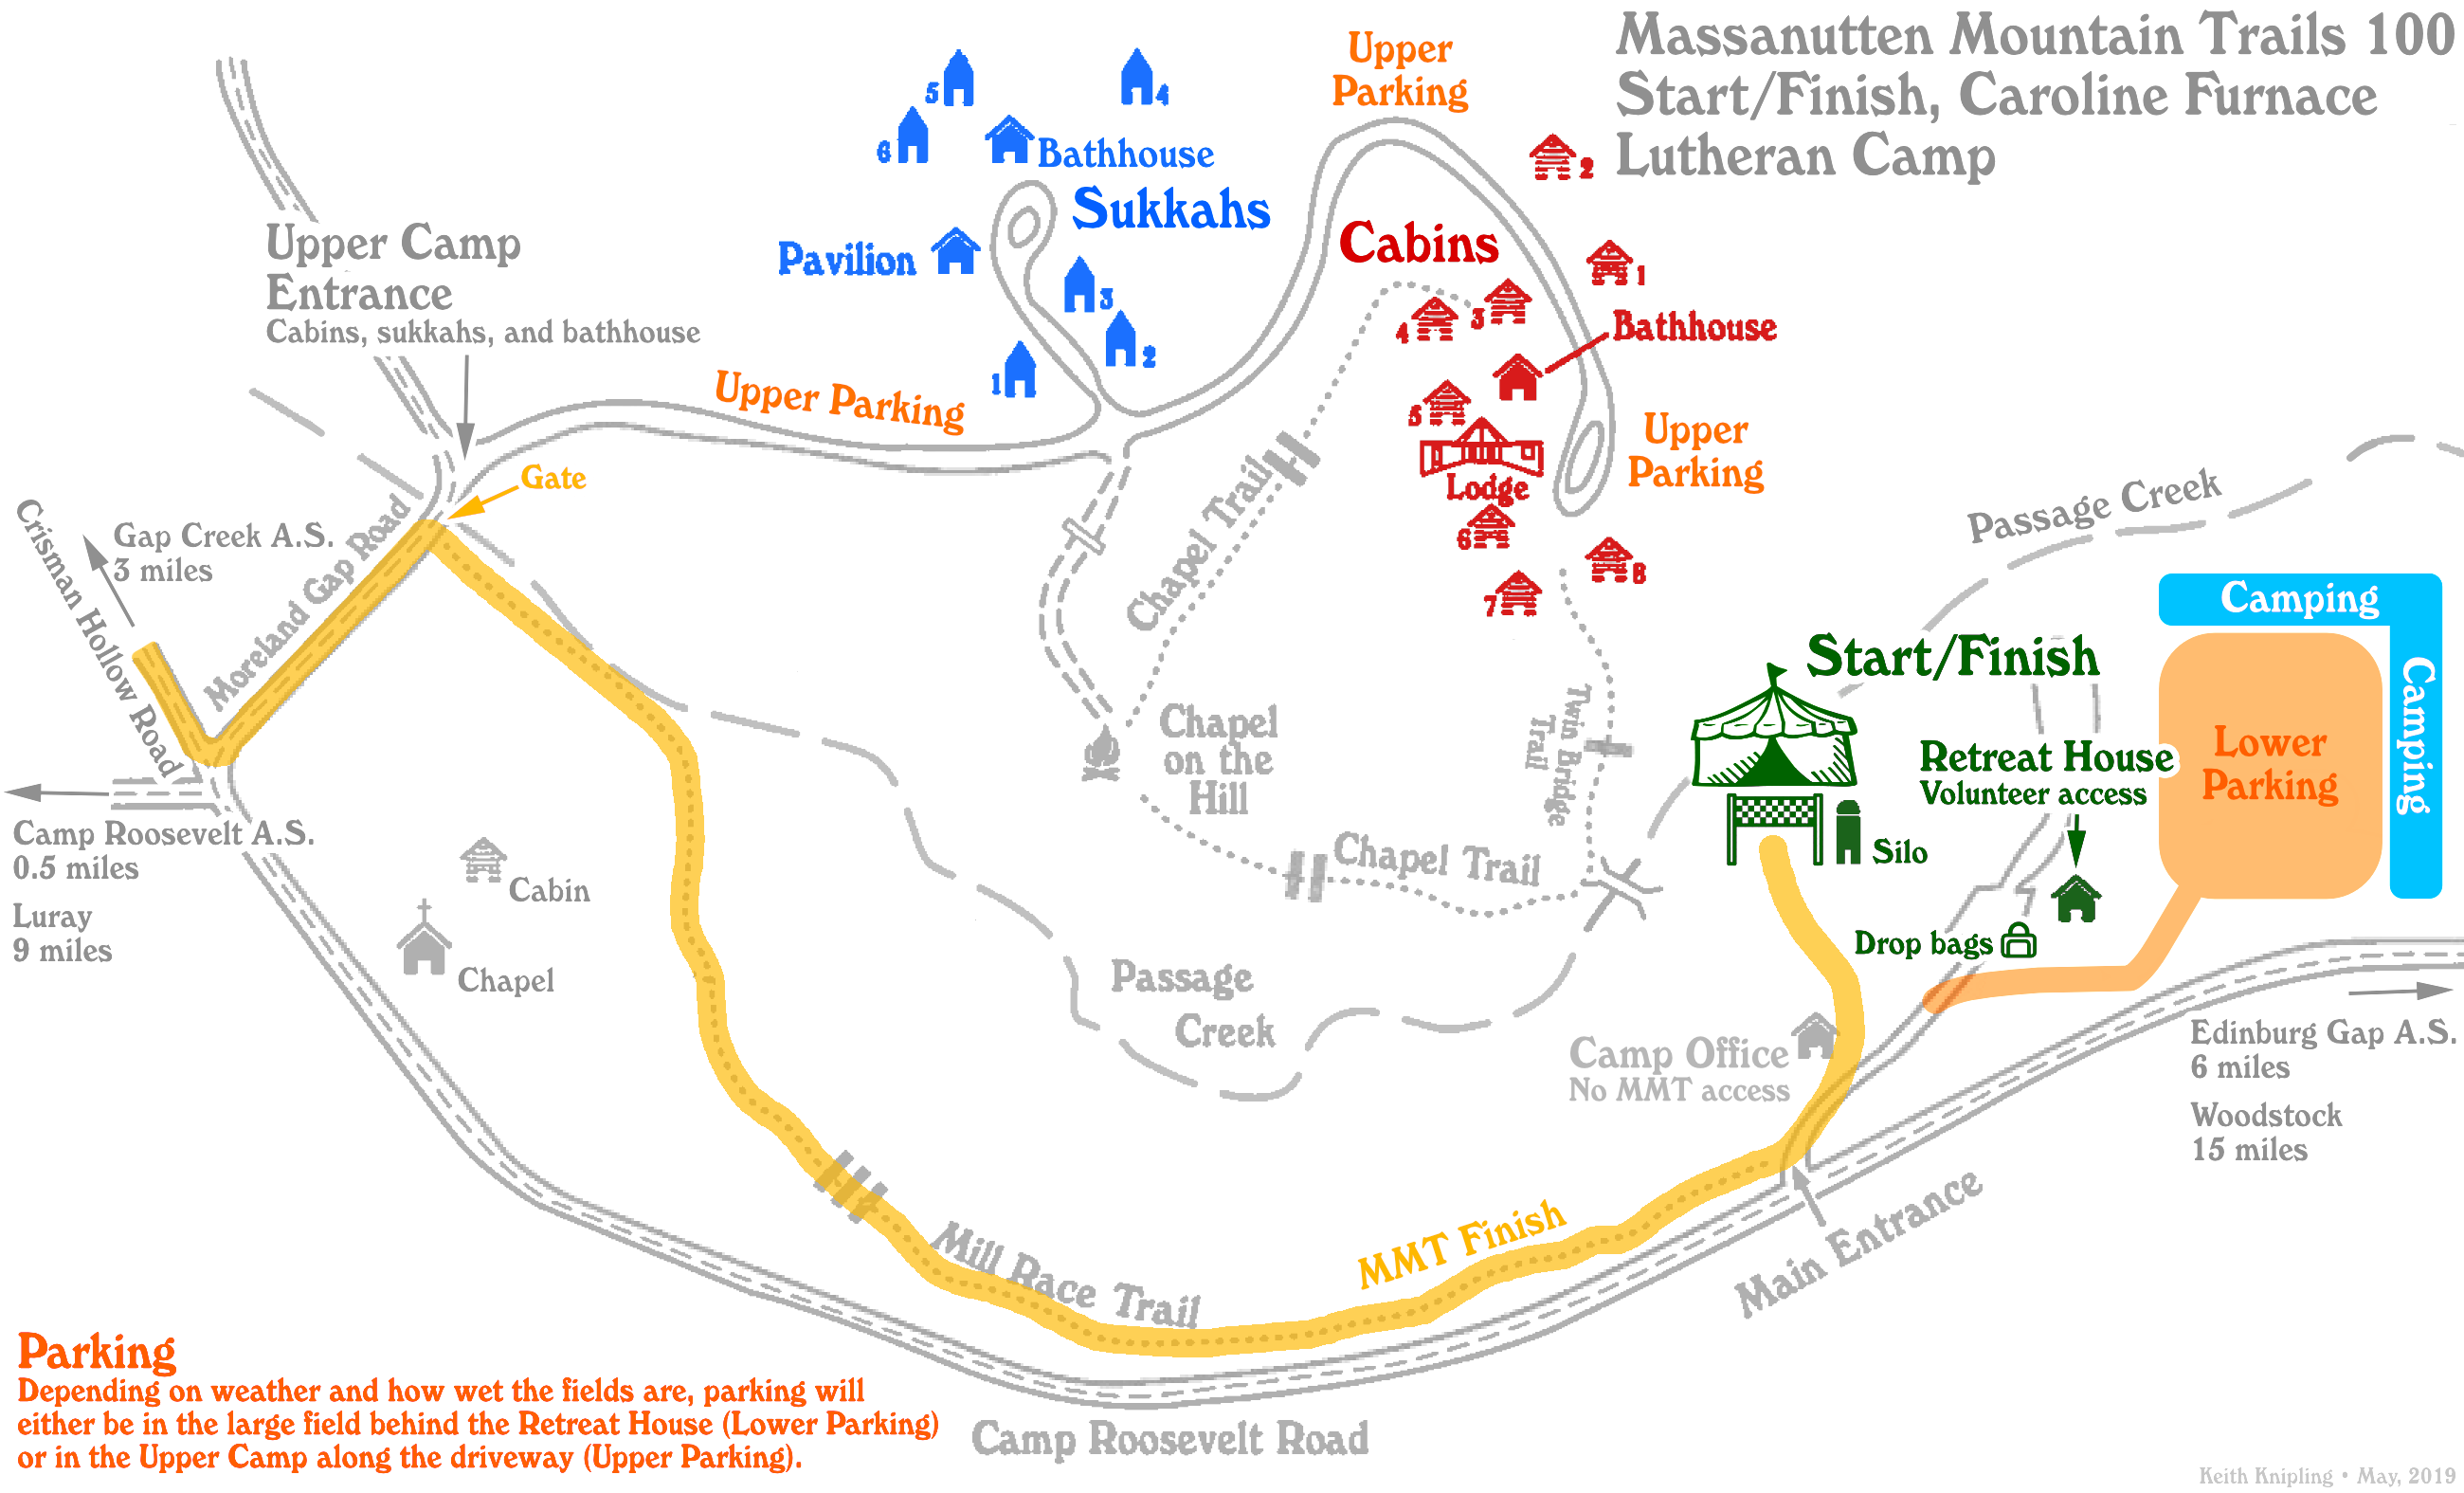 Route of the finish (in yellow) through the Caroline Furnace Lutheran Camp